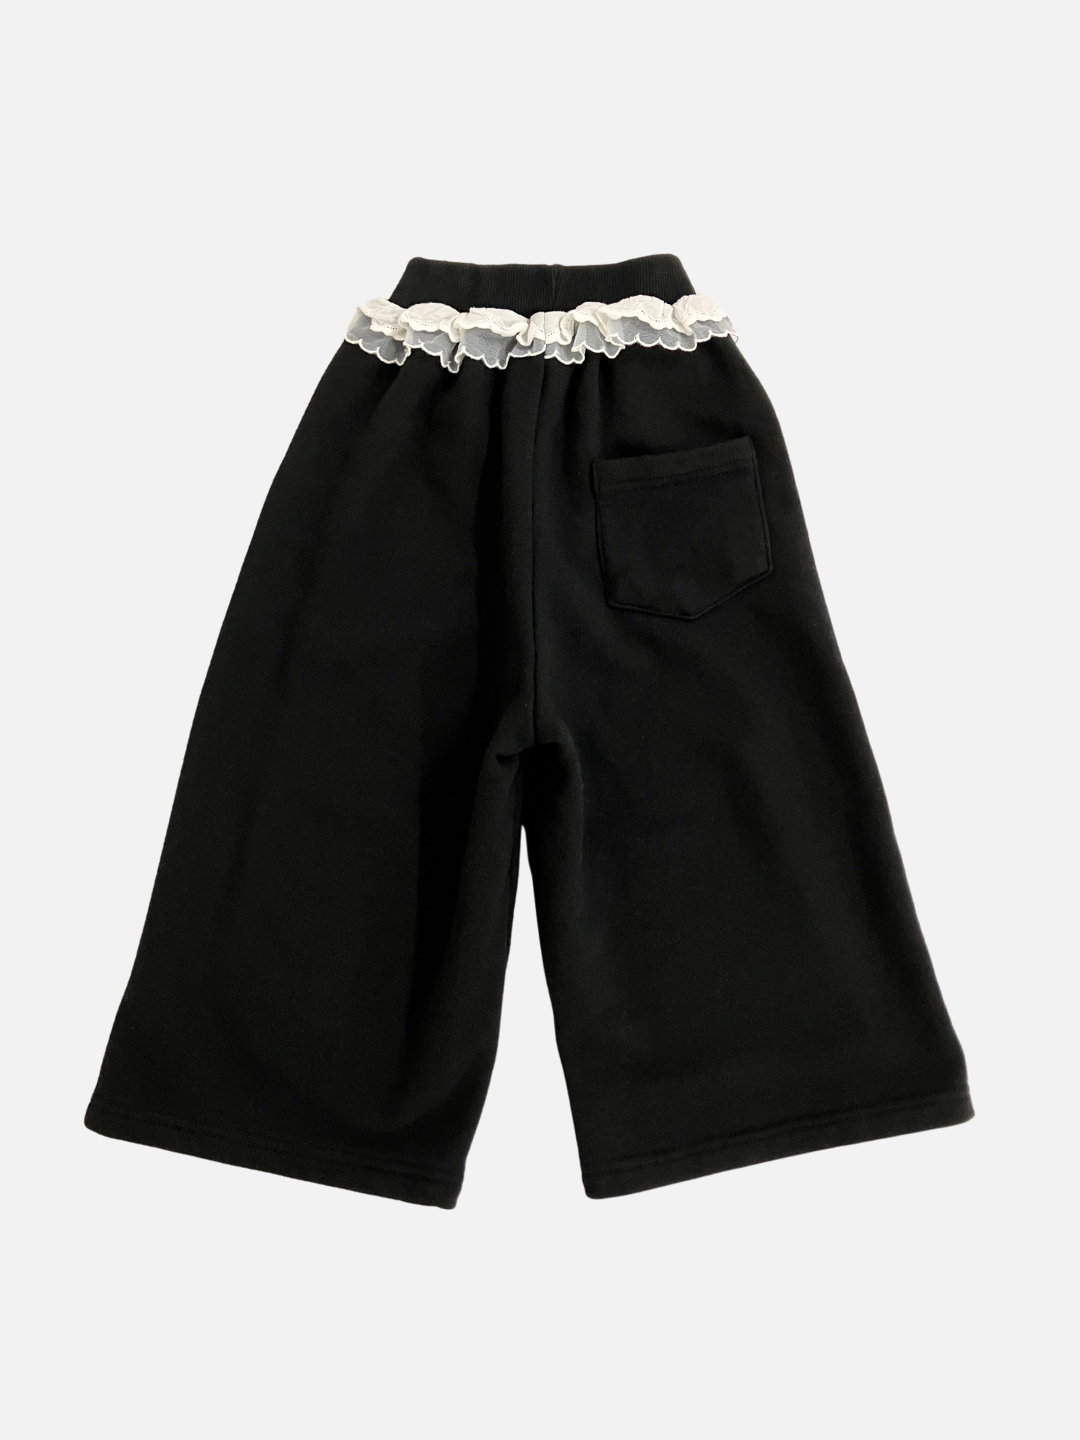 Back view of kid's Relay pants in black with  white ruffles at the waist